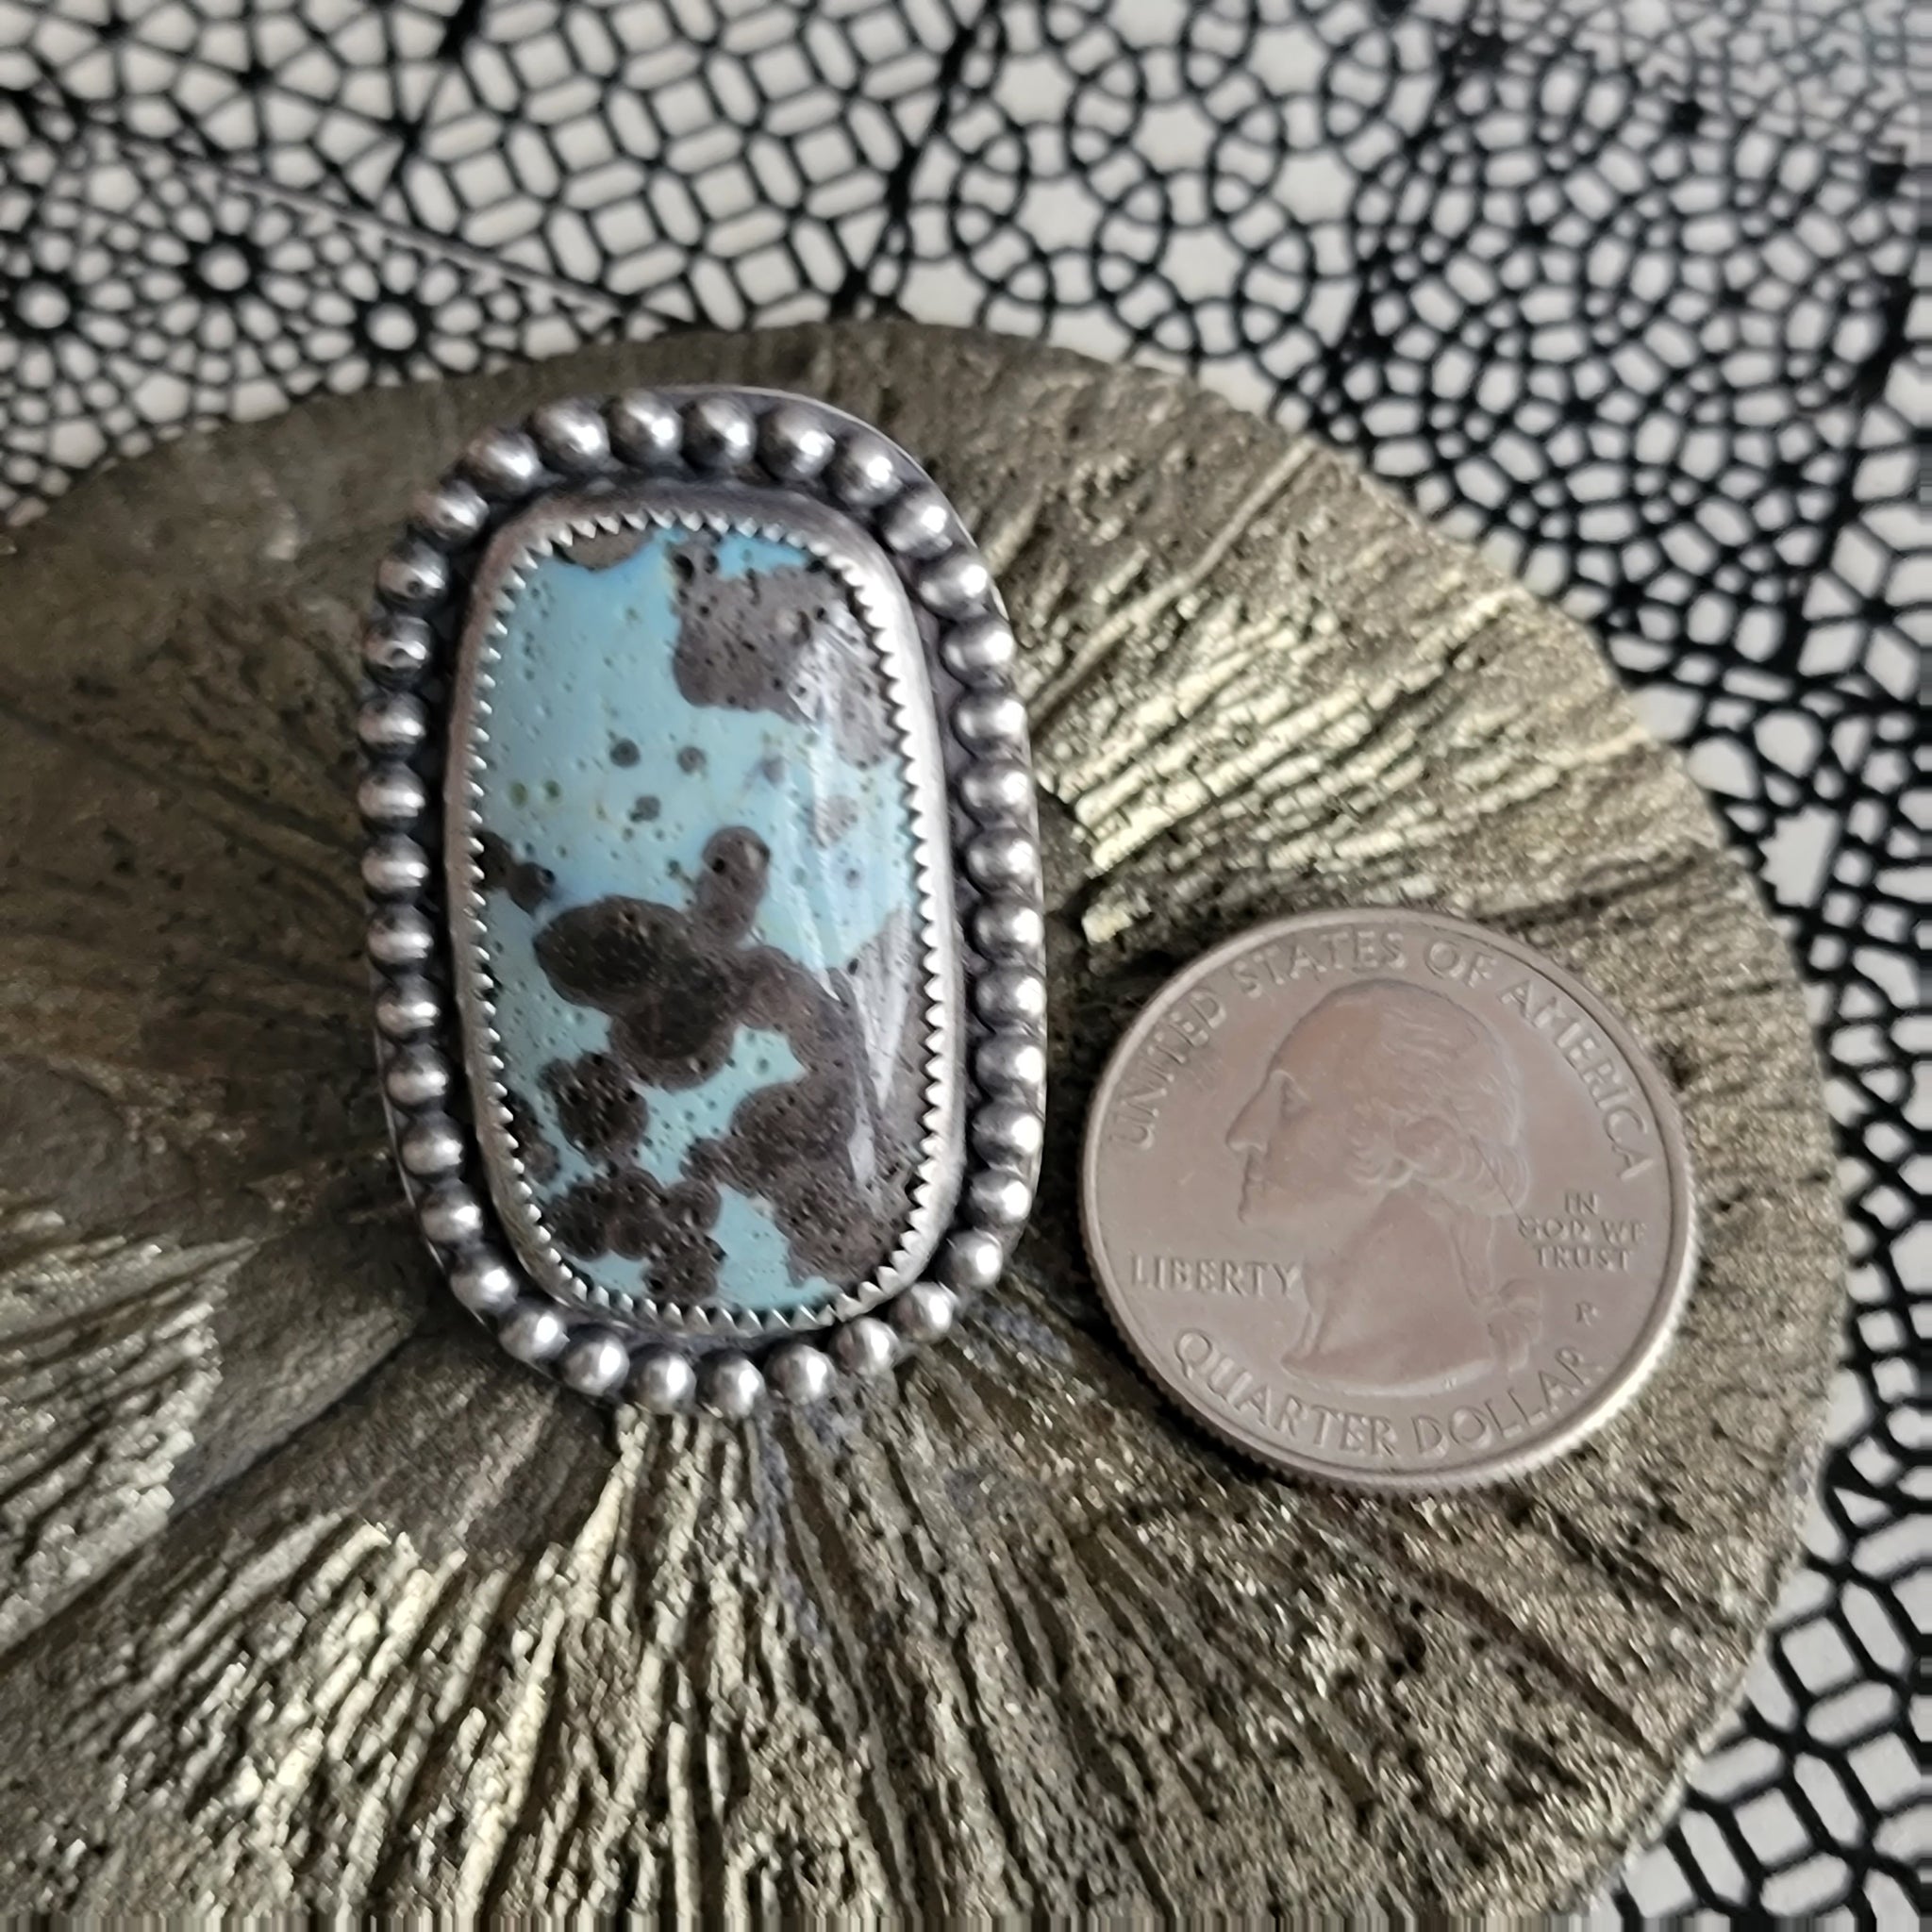 Leland Blue Statement Ring in Sterling Silver Size 6